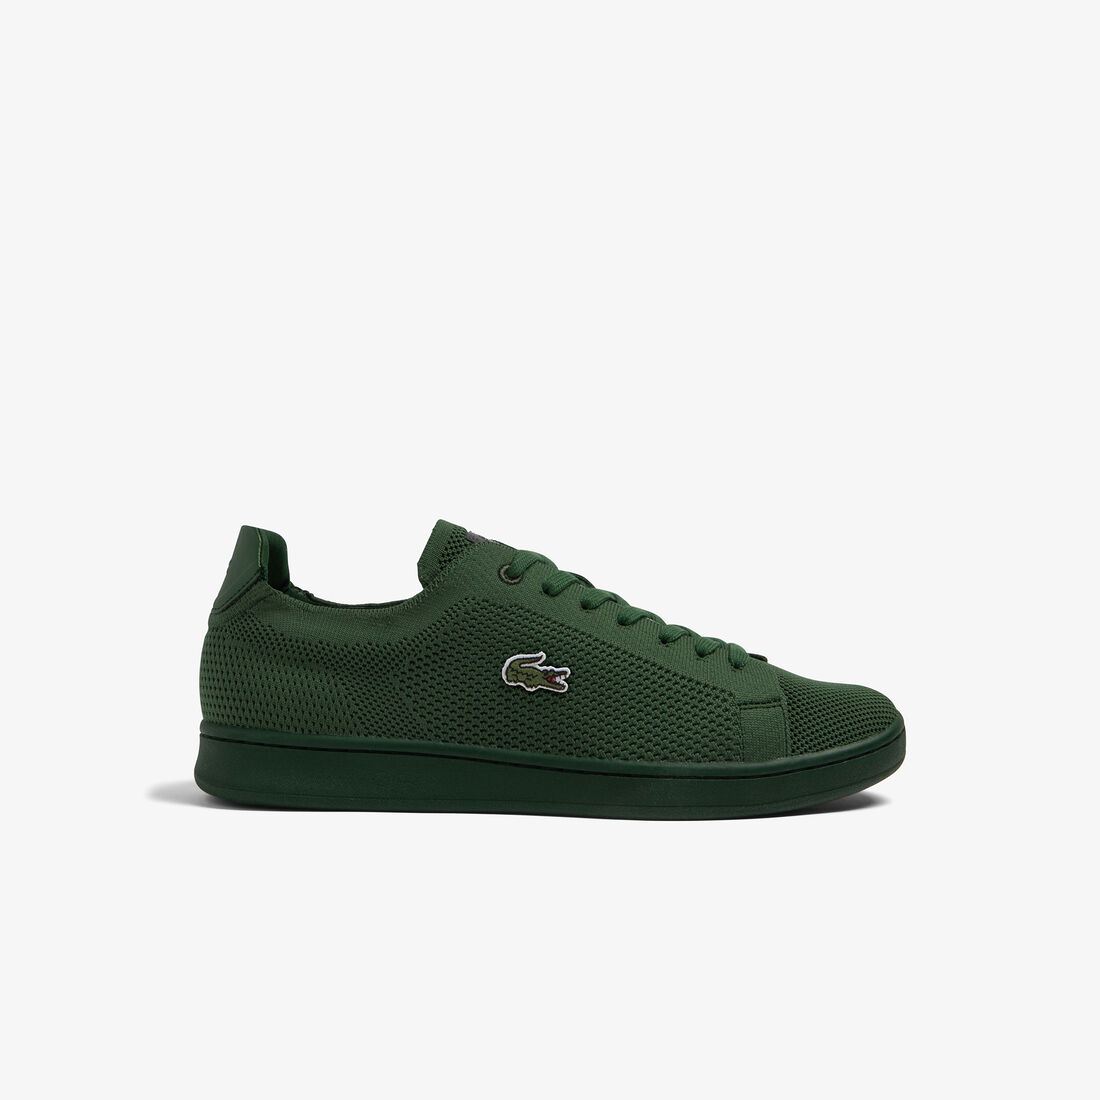 Men's Lacoste Carnaby Piquée Textile Trainers - 45SMA0023-GG2